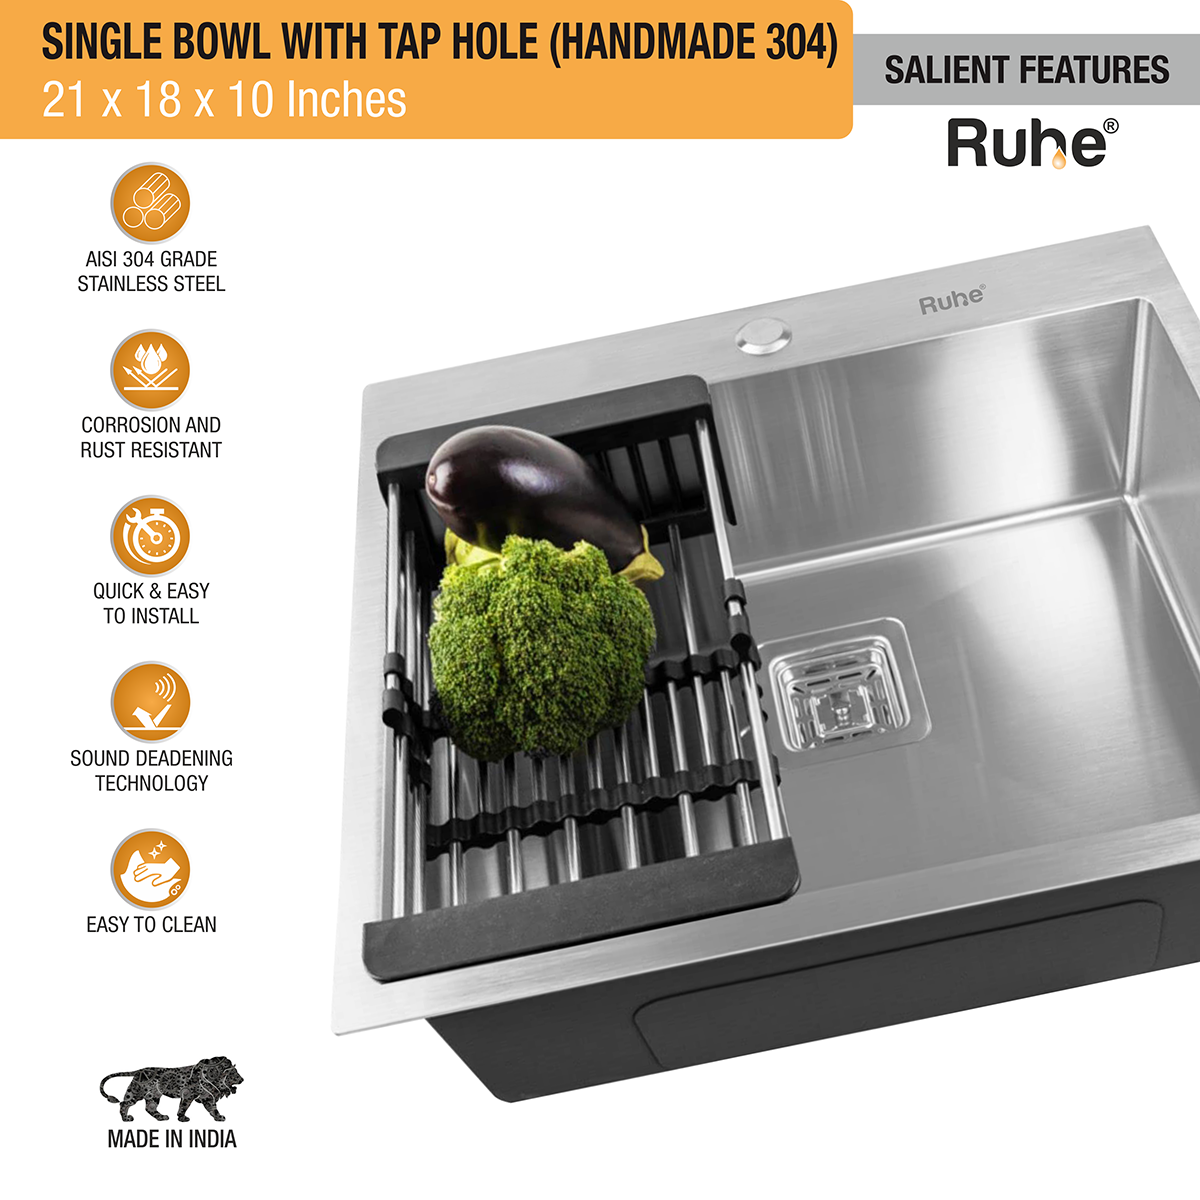 Handmade Single Bowl 304-Grade Kitchen Sink (21 x 18 x 10 Inches) with Tap Hole features and benefits